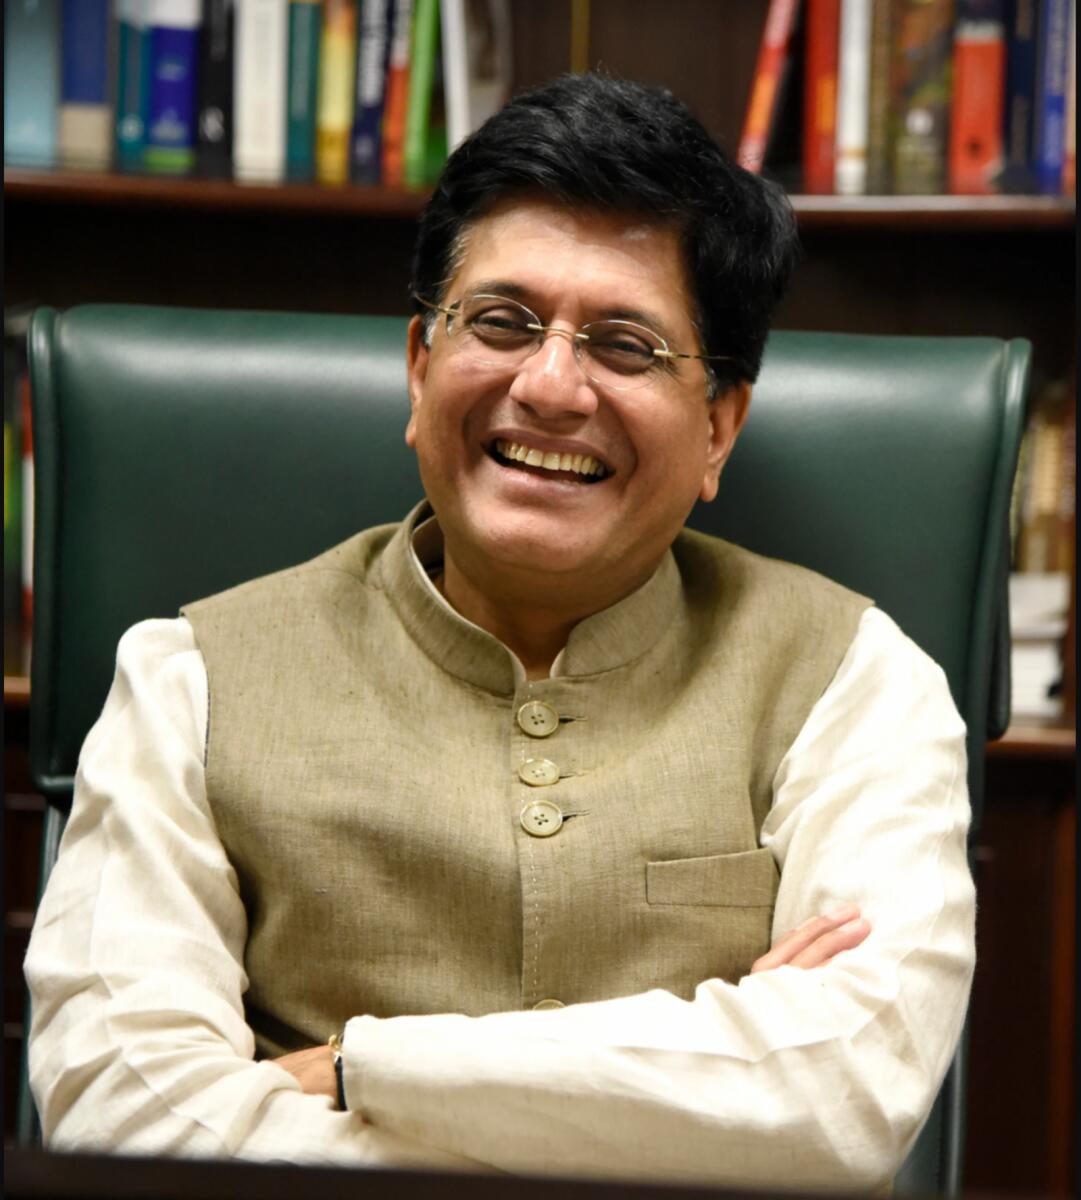 Piyush Goyal, Minister of Commerce &amp; Industry, Consumer Affairs &amp; Food &amp; Public Distribution and Textiles, India.